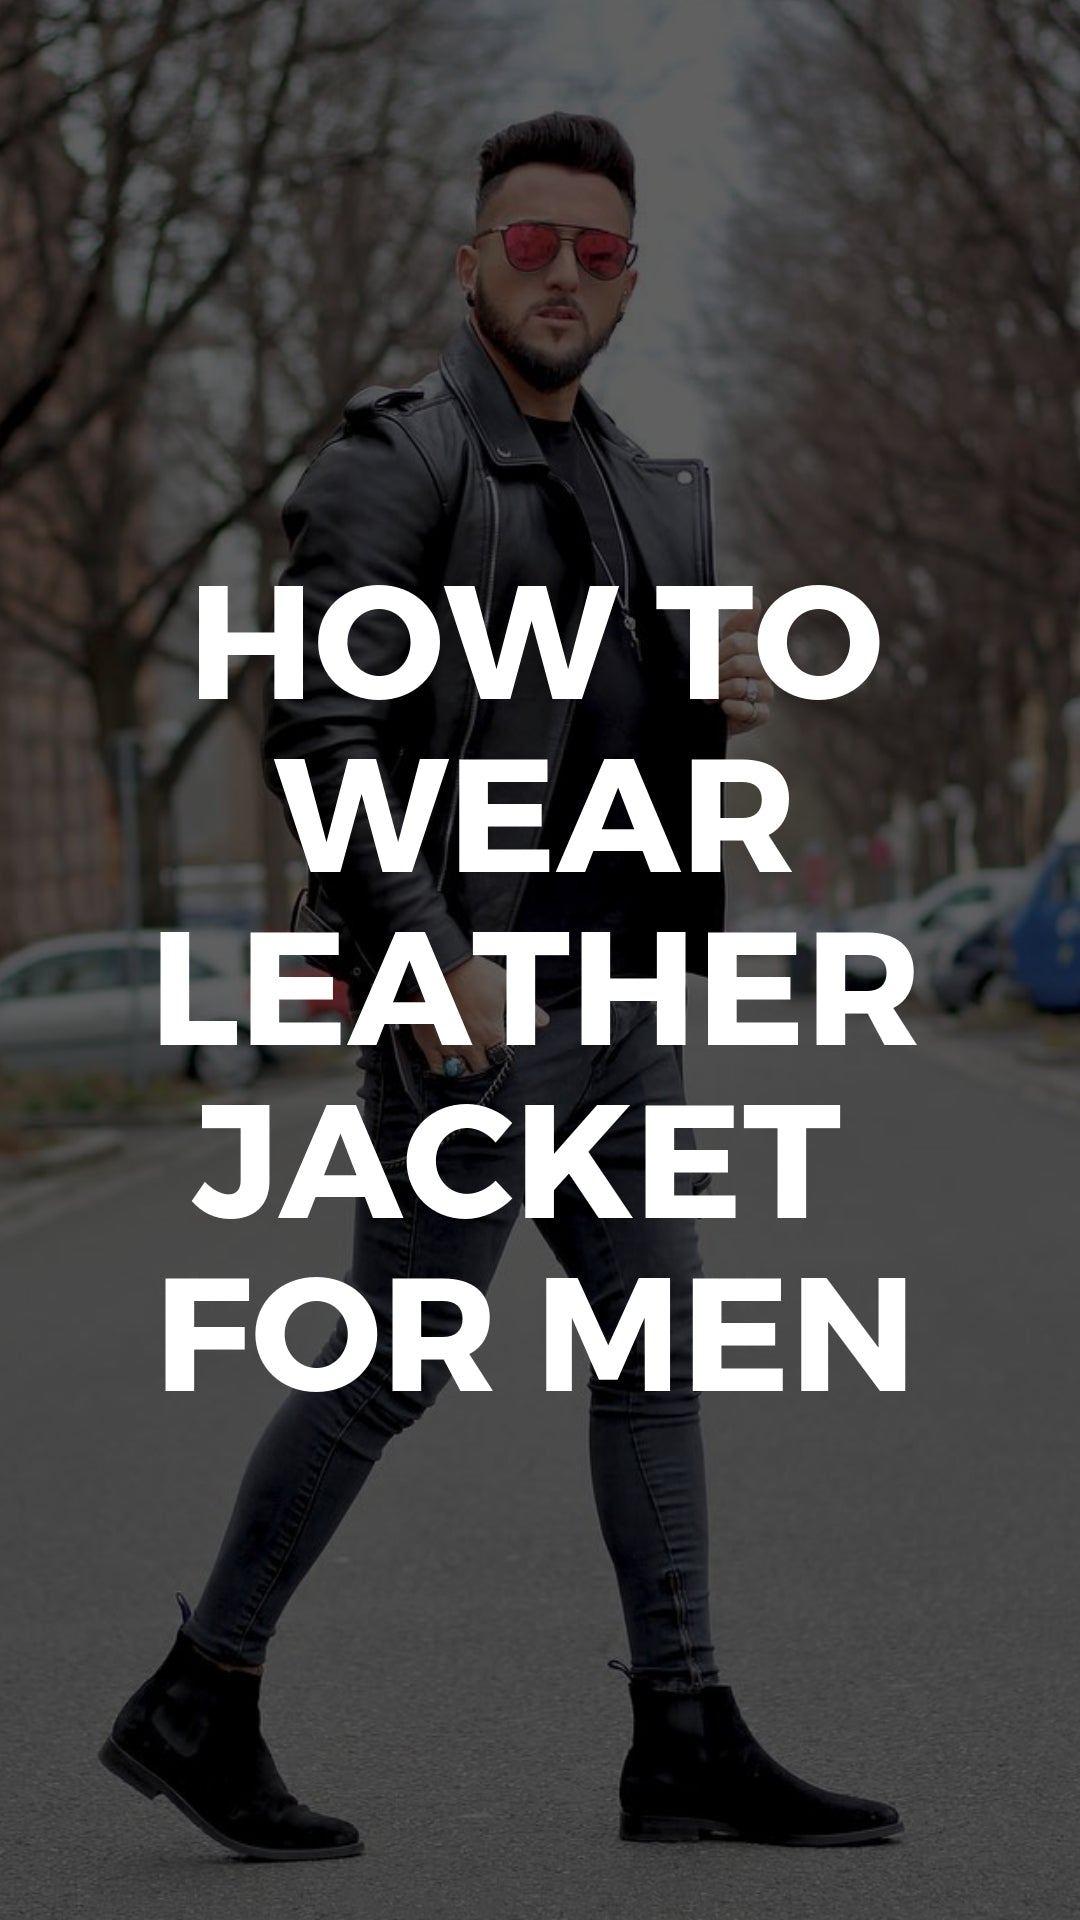 5 Leather Jacket Outfits You Haven't Seen Yet #leather #jacket #outfits ...